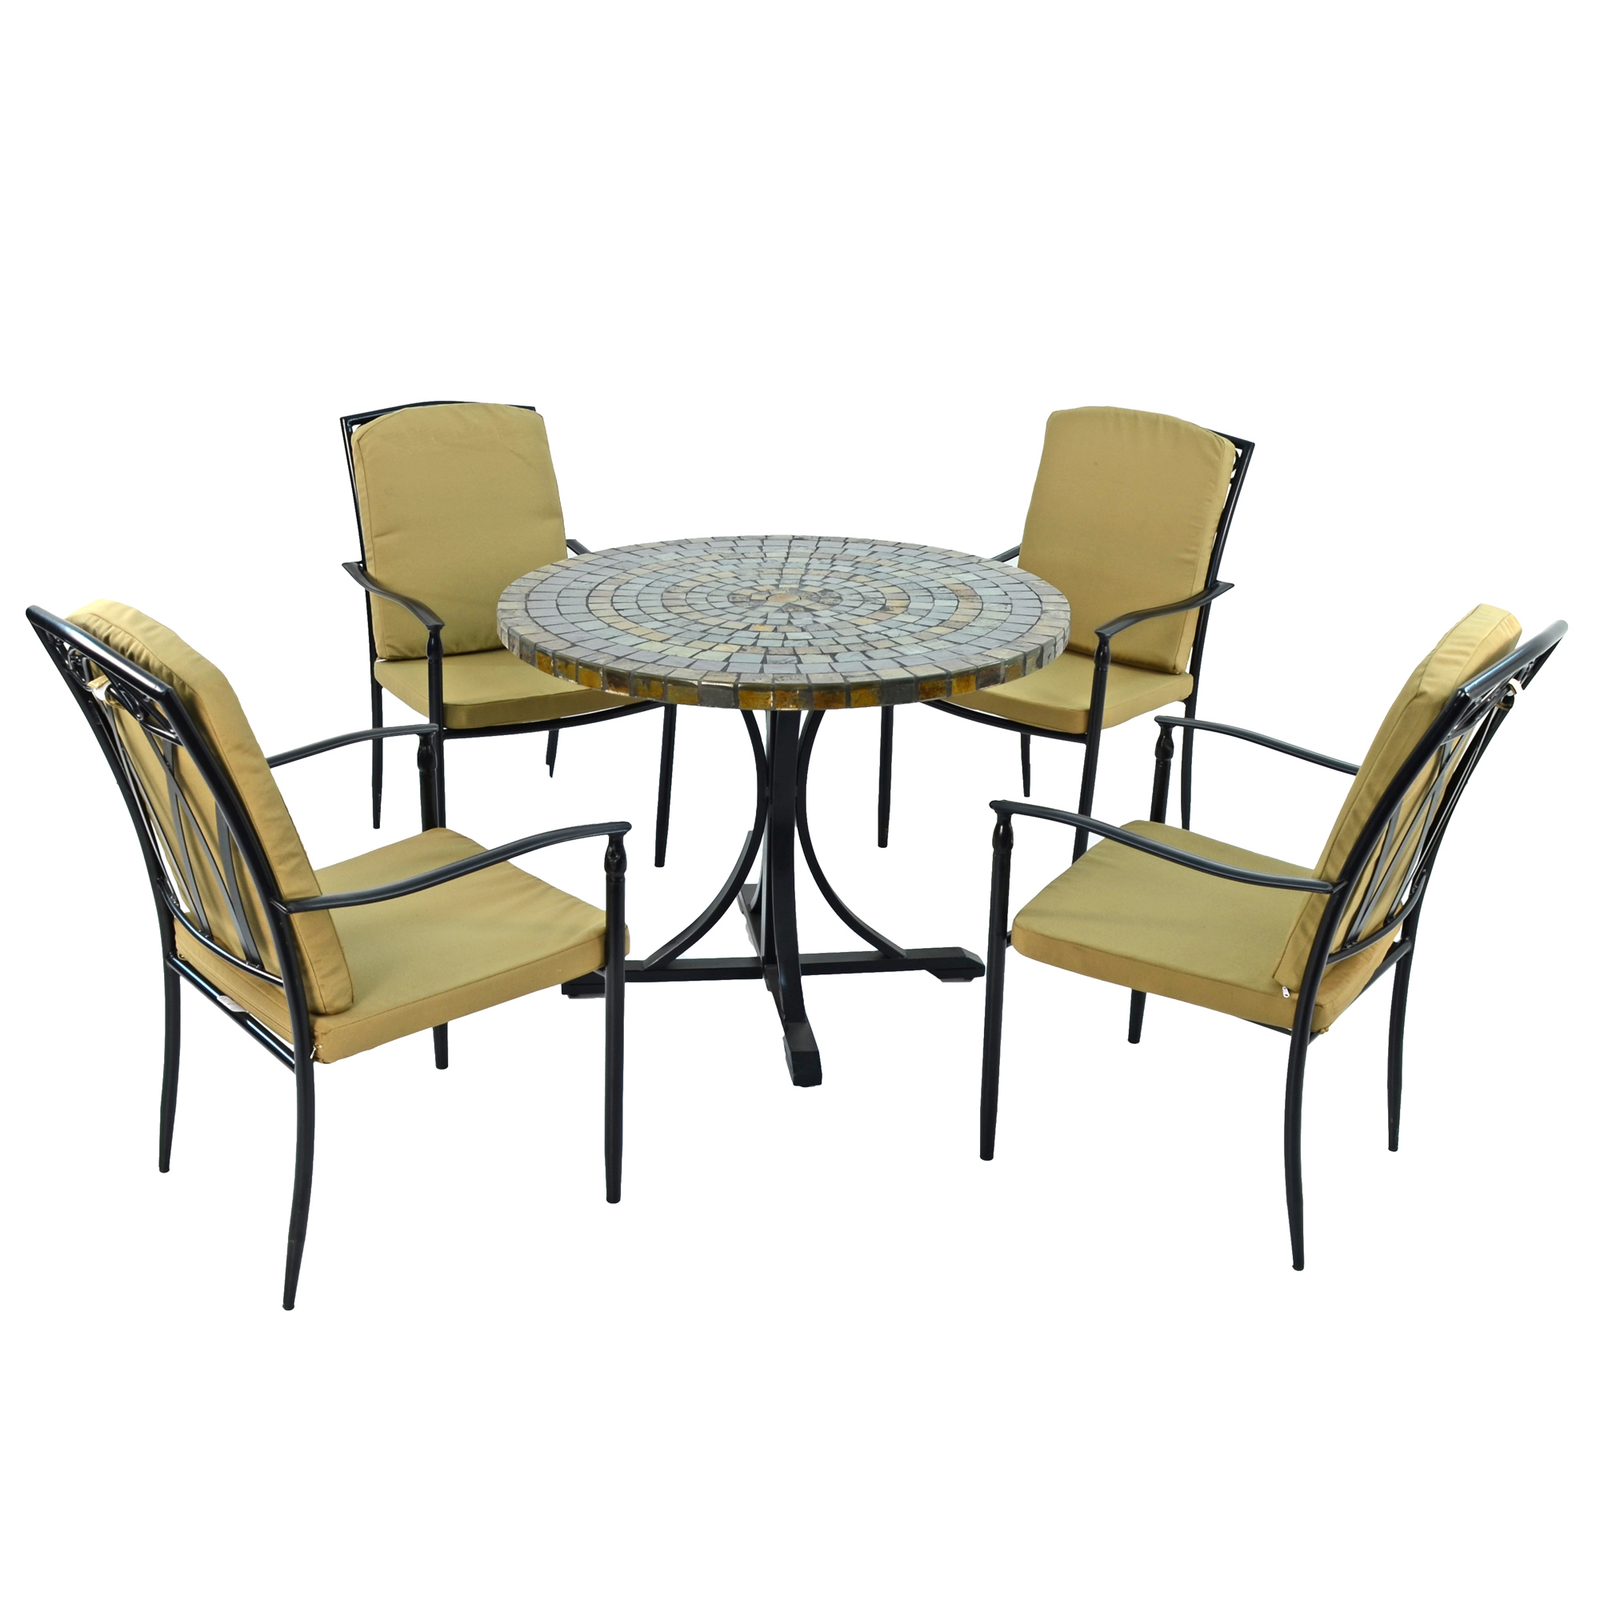 Byron Manor Monterey Garden Dining Table With 4 Ascot Chairs Set Dining Sets Byron Manor Default Title  